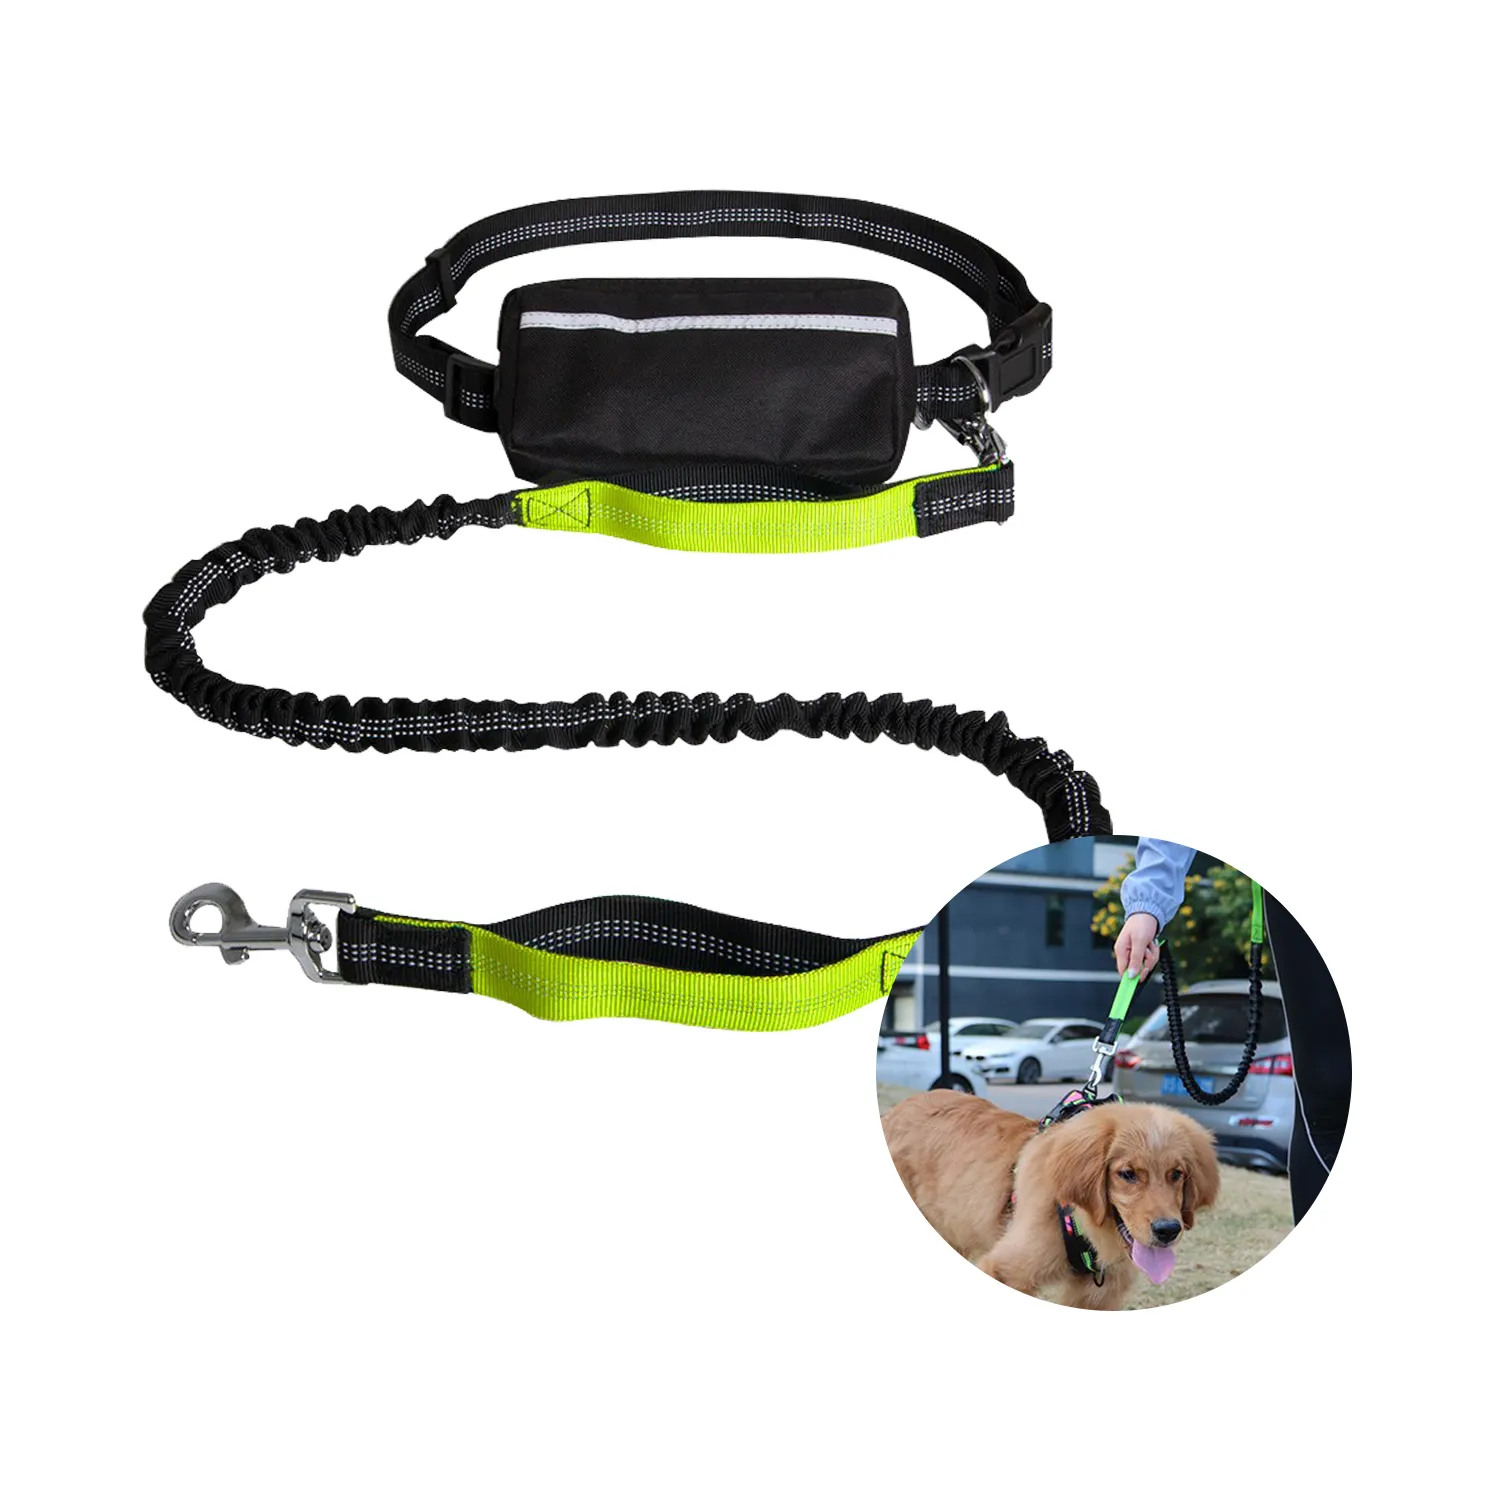 Adjustable and Reflective Pet Leash JH Retractable Dog Leash with No-Pull Bungee for Small Medium and Large Dogs Strong Dog Seatbelt for Running Walking Hiking Jogging Driving 